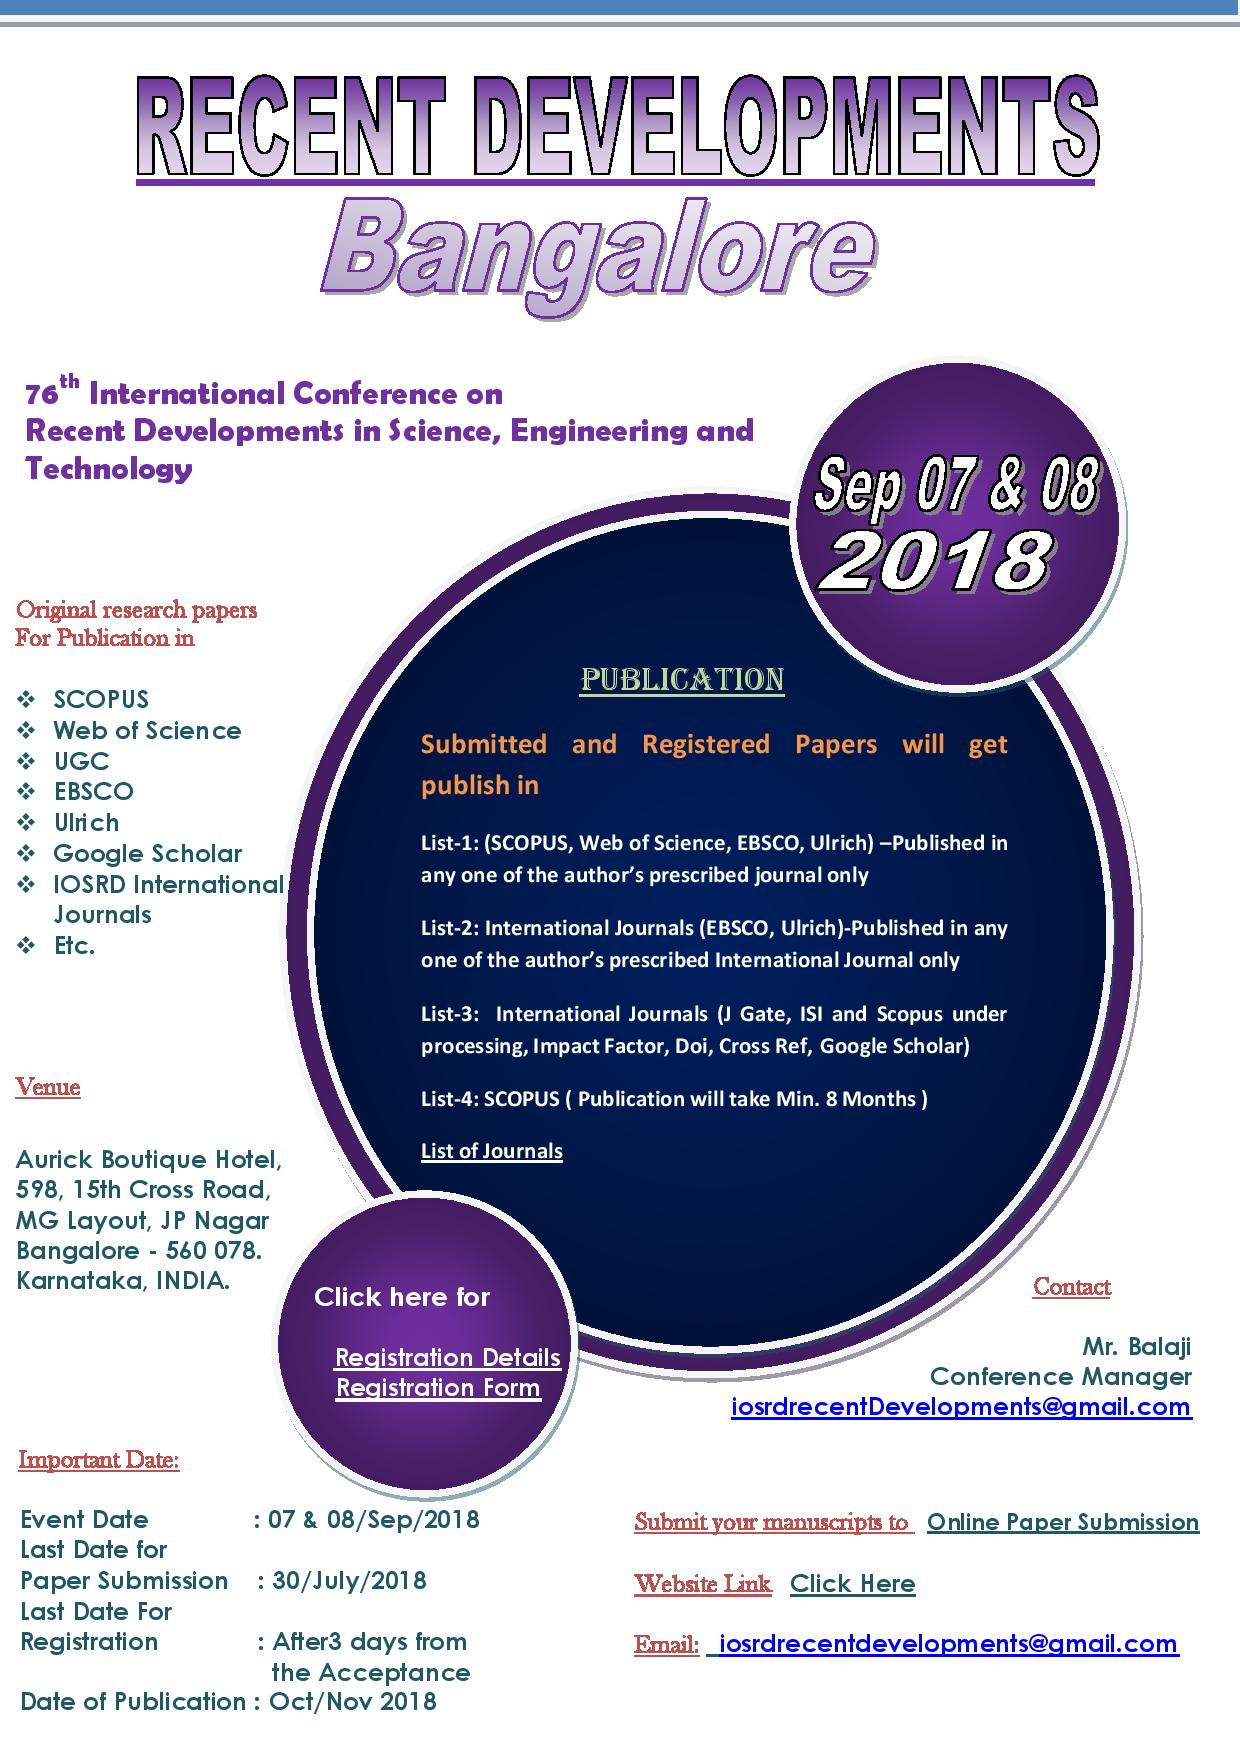 76th International Conference on Recent Developments in Science, Engineering and Technology, Bangalore, Karnataka, India